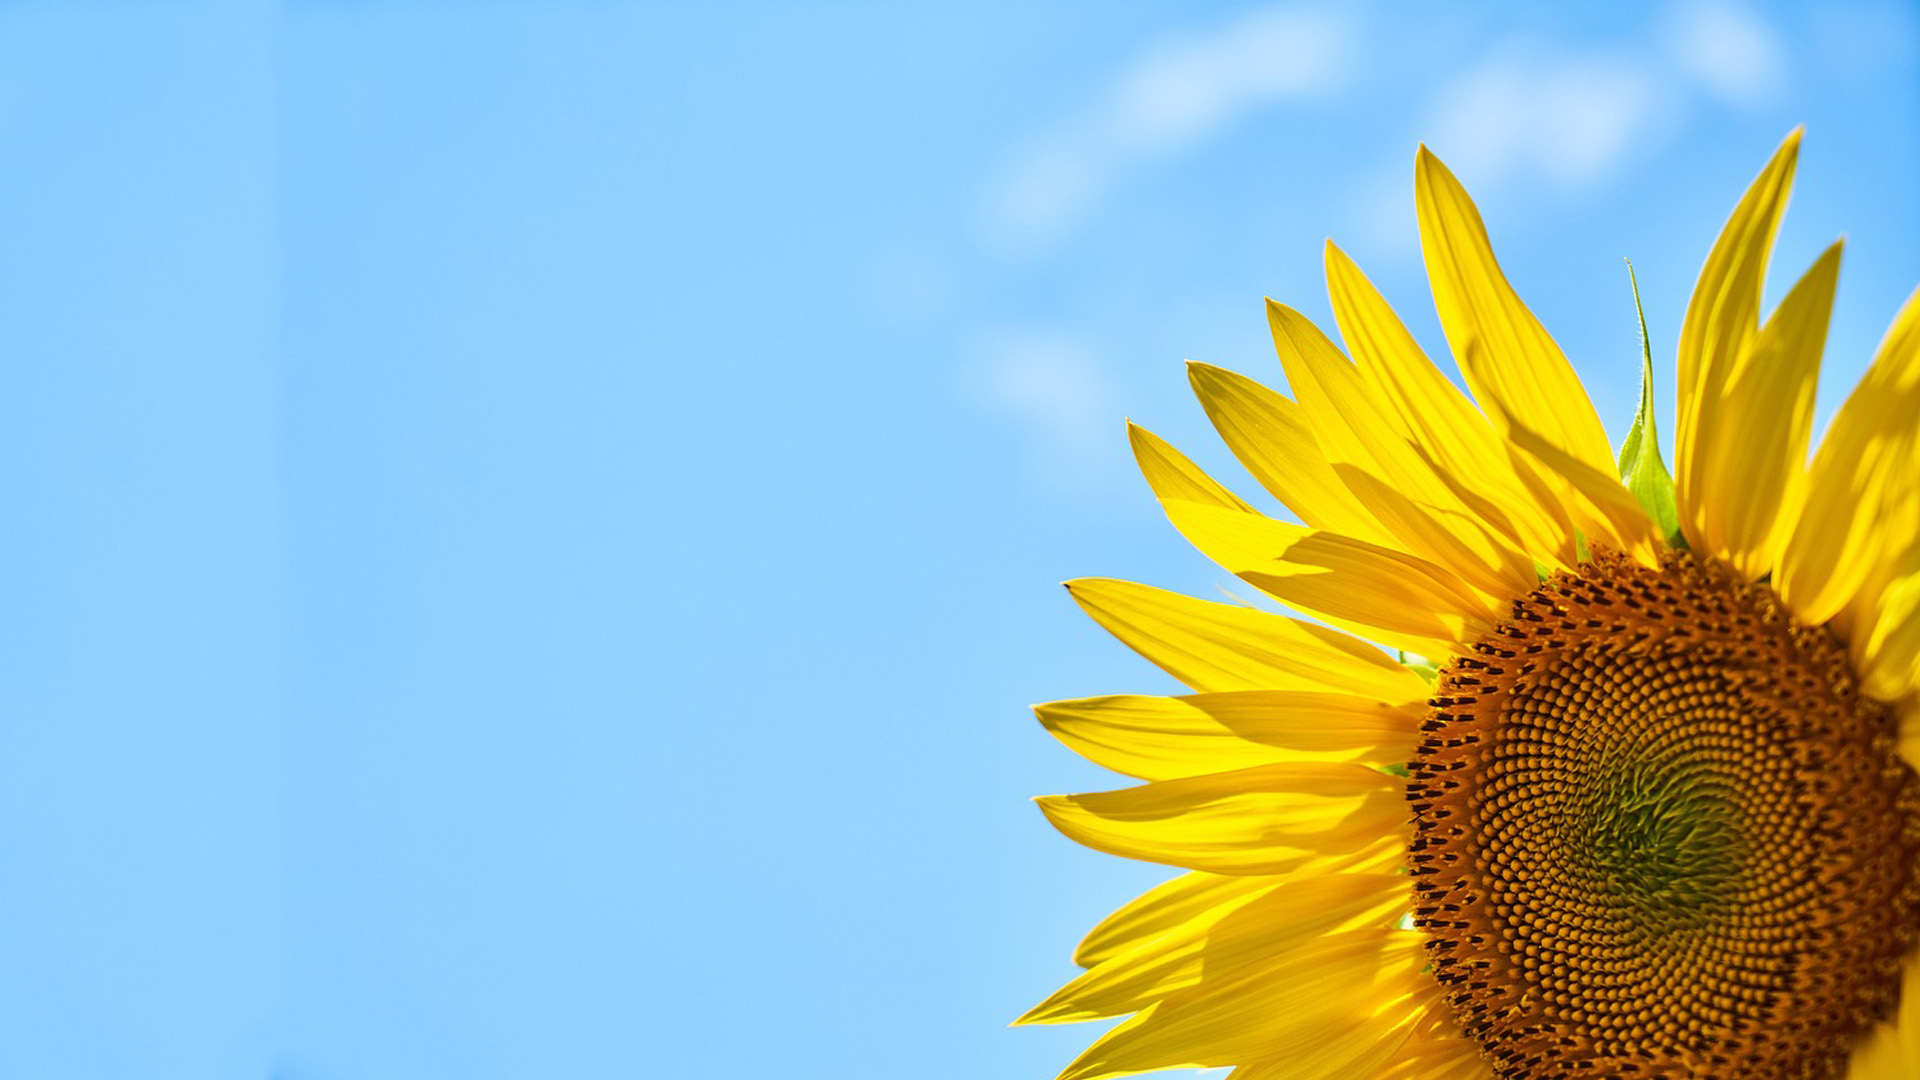 A up close photo of a sunflower making up the bottom right corner of the image. Photo is taken at the angle of looking up into the sky. So the rest of the image is blue skies with little clouds